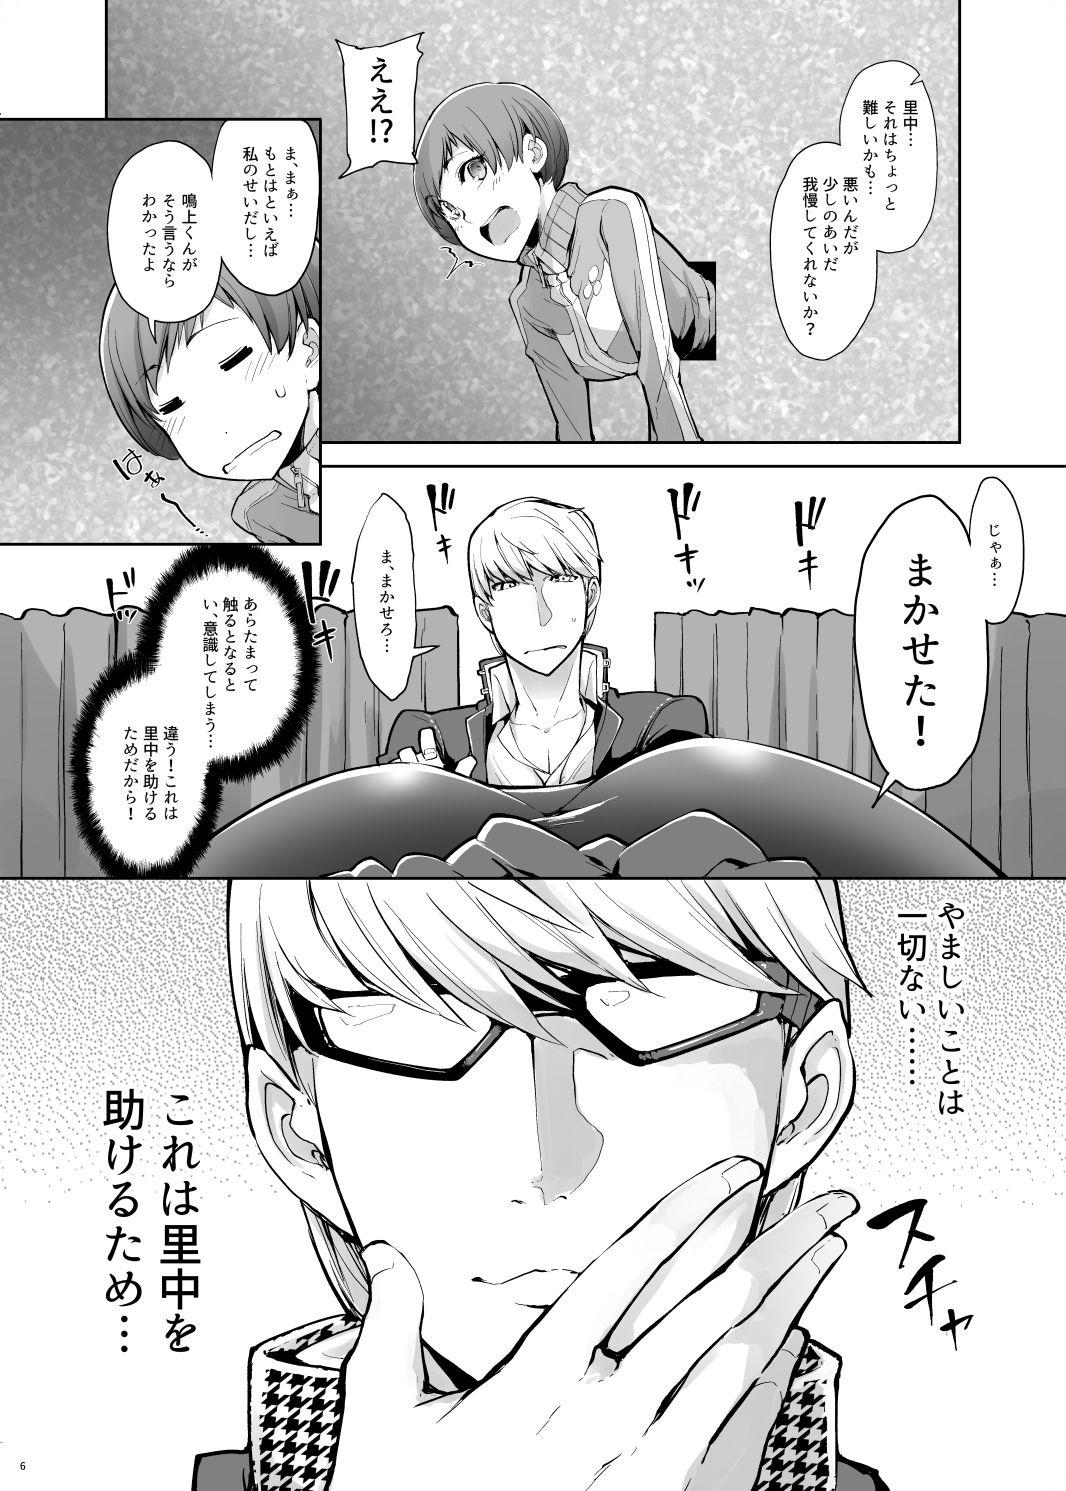 Girls Kabe Chie - Persona 4 Tight - Page 7